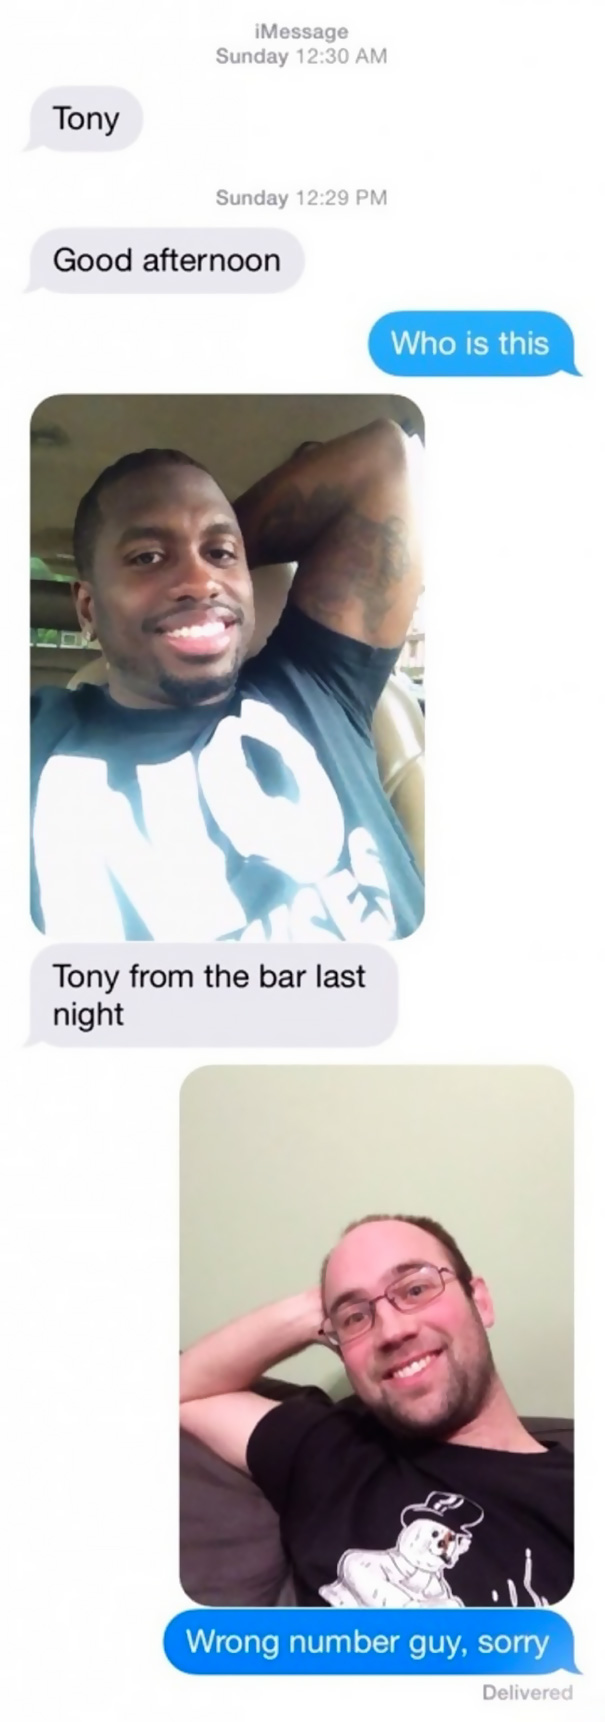 funny wrong number - iMessage Sunday Tony Sunday Good afternoon Who is this Tony from the bar last night Wrong number guy, sorry Delivered